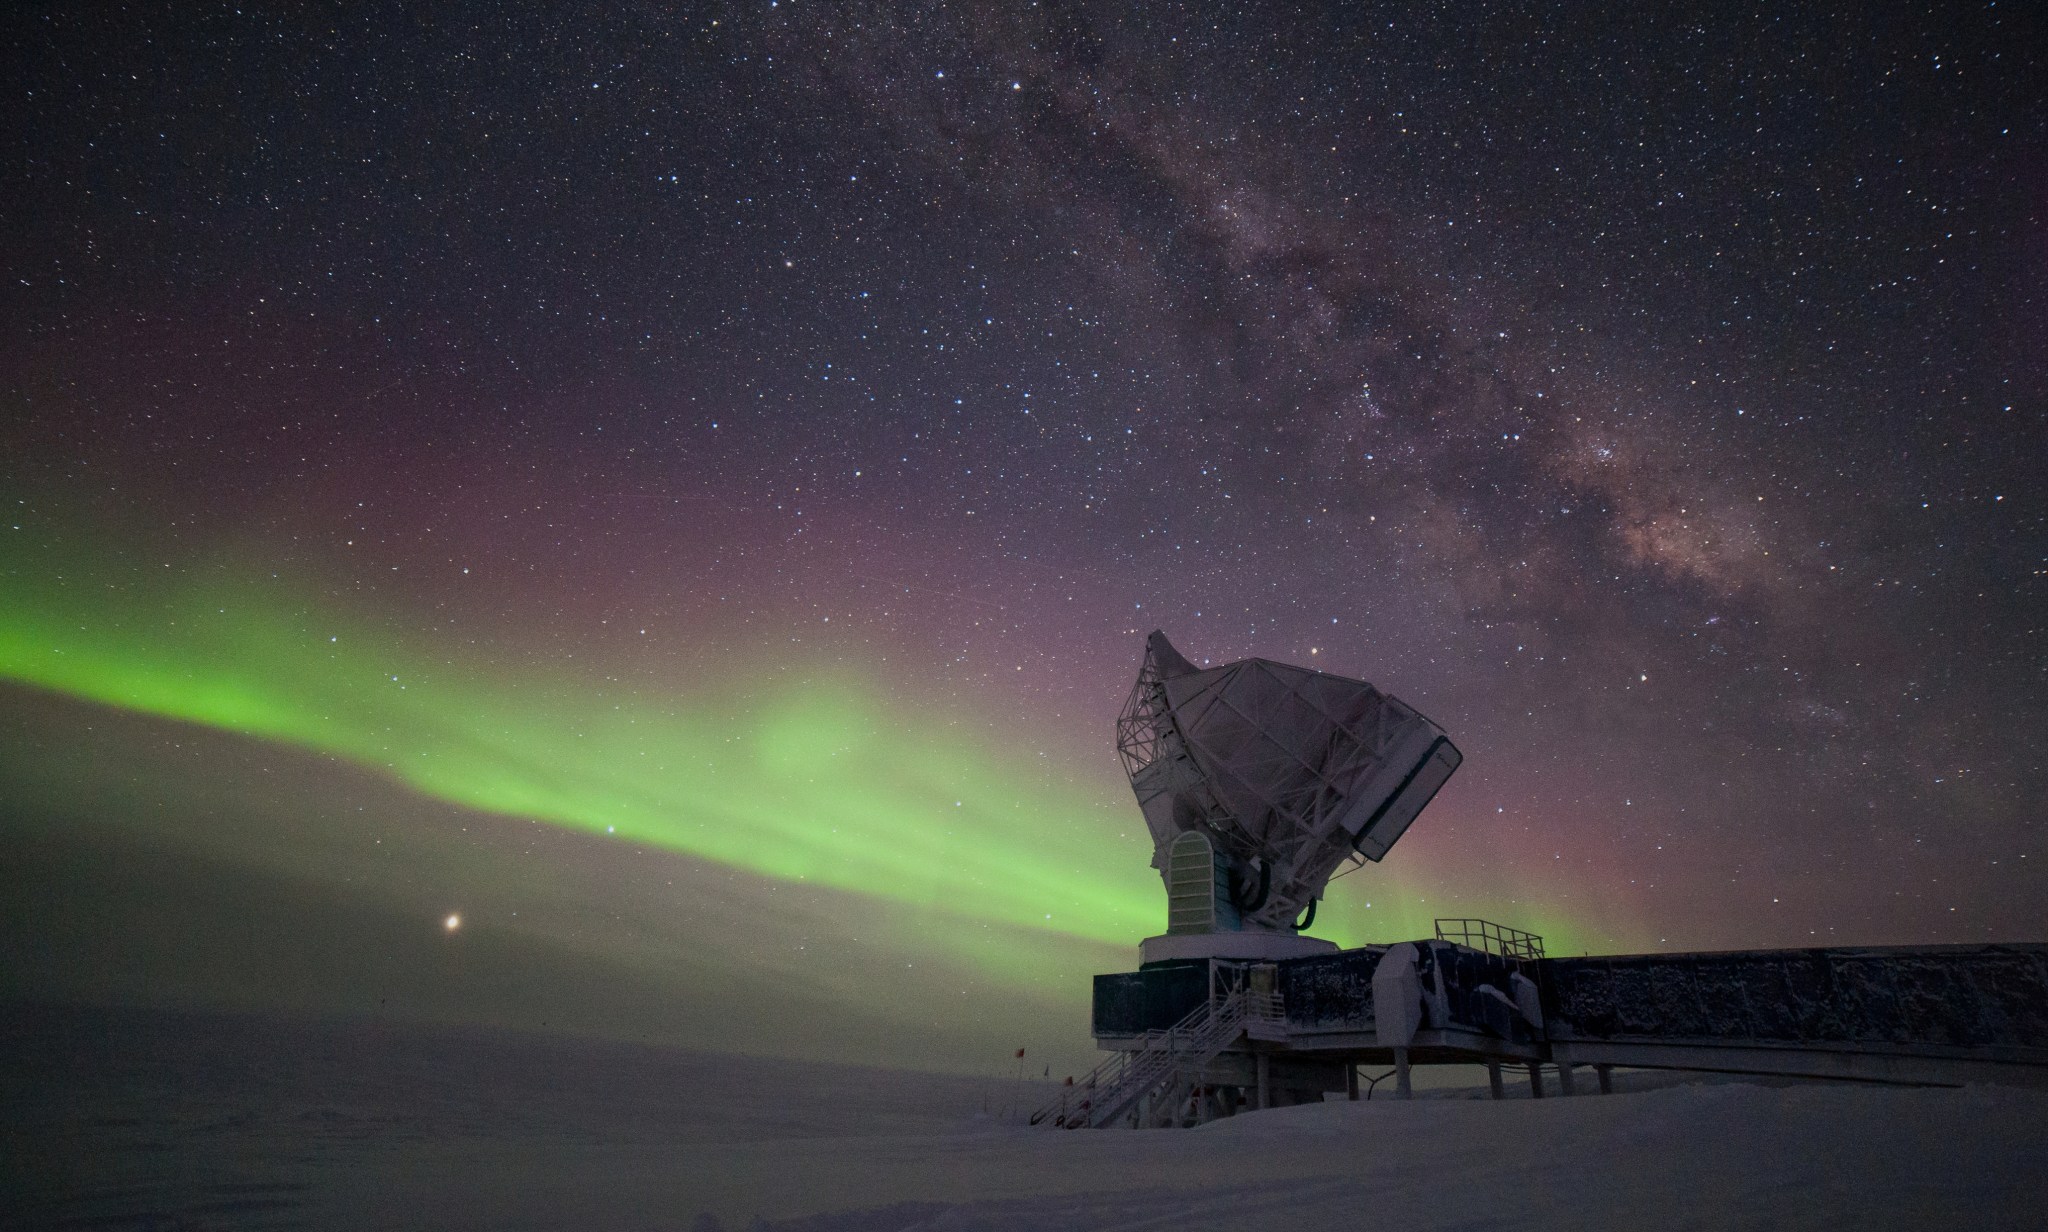 The aurora australis and the Milky Way fill the long winter night sky over the South Pole Telescope